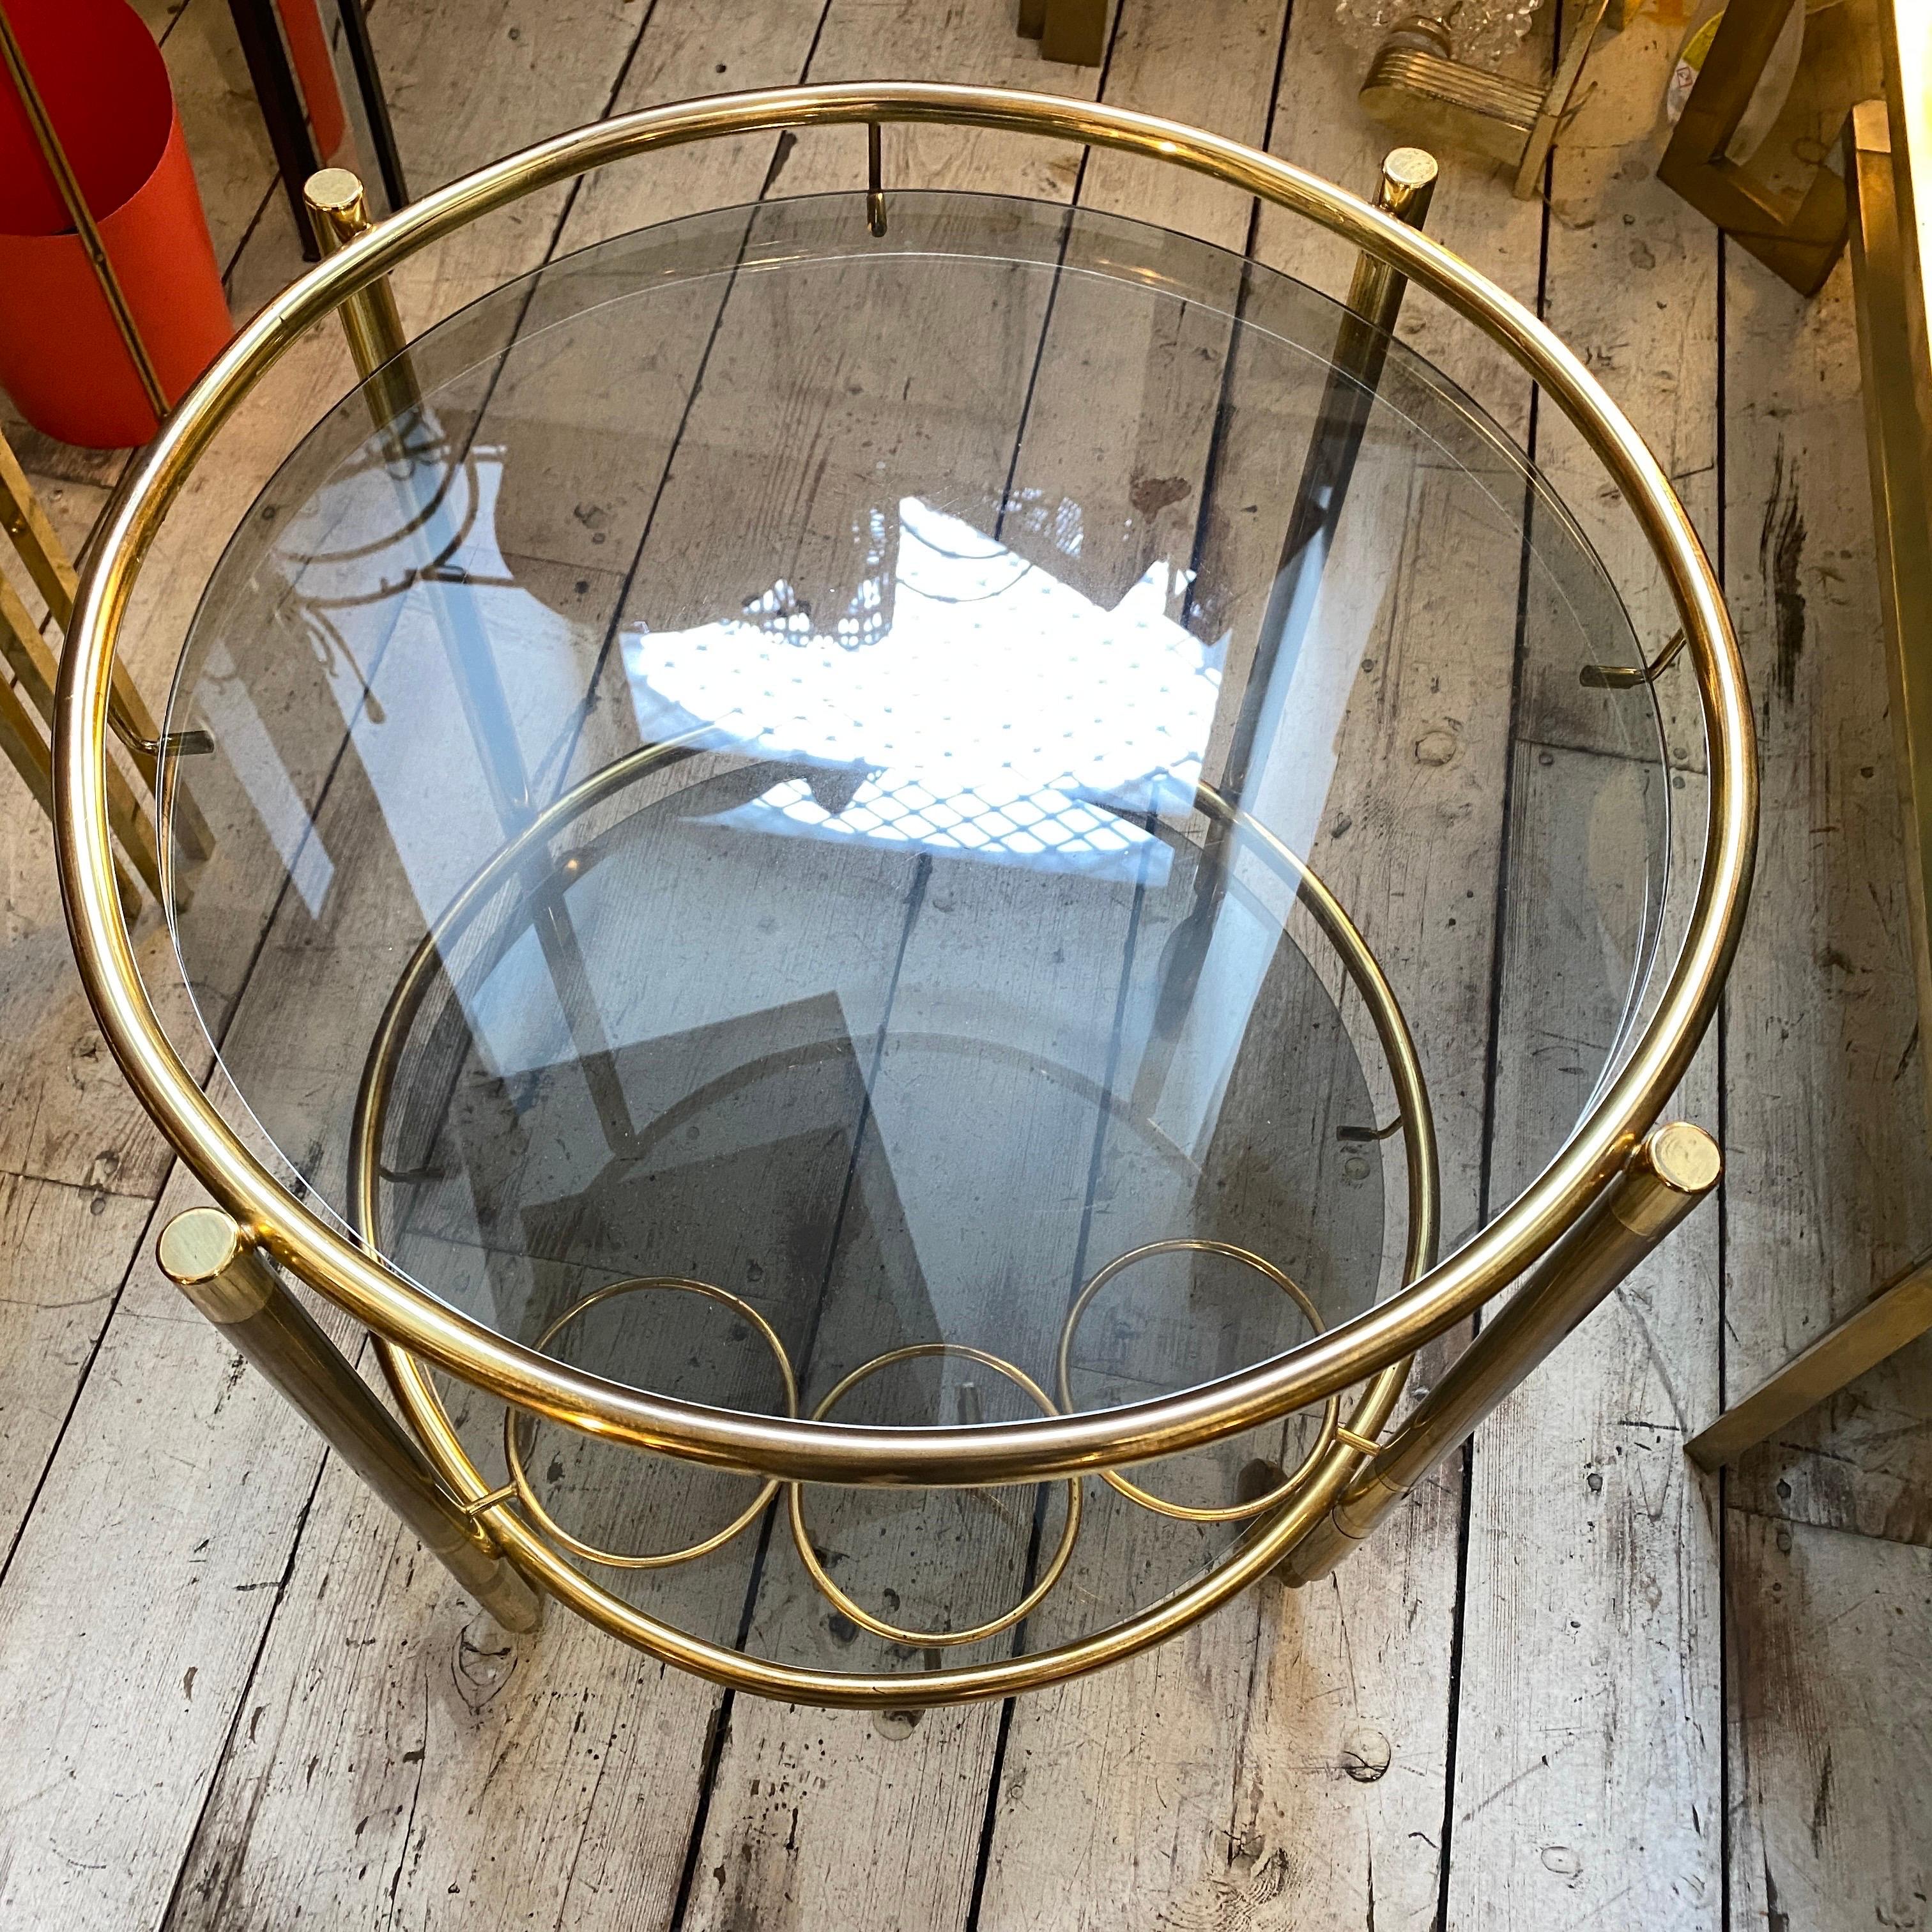 A very good conditions, brass and smoked glass italian bar cart, it has been made in the Seventies and the original brass patina gives it a stunning vintage look. This round bar cart is a stylish and functional piece of furniture that captures the